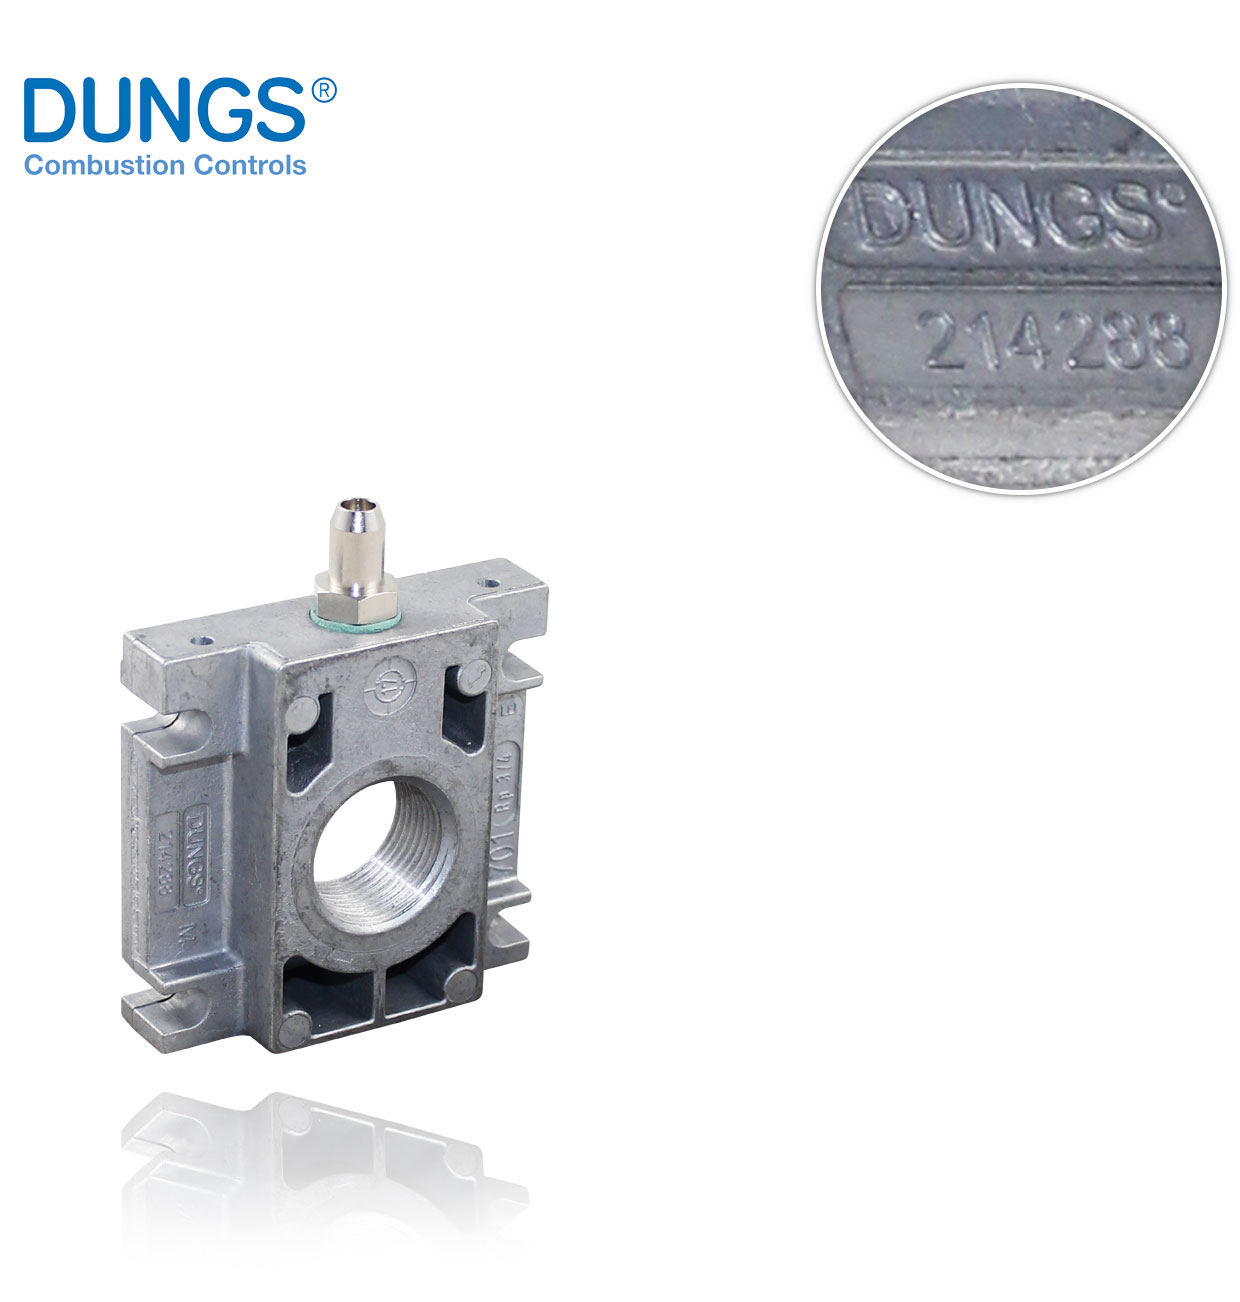 (231230) DUNGS 3/4" FLANGE FOR MBC 300/ DMV-D 507 WITH E.C. PRESSURE SOCKET